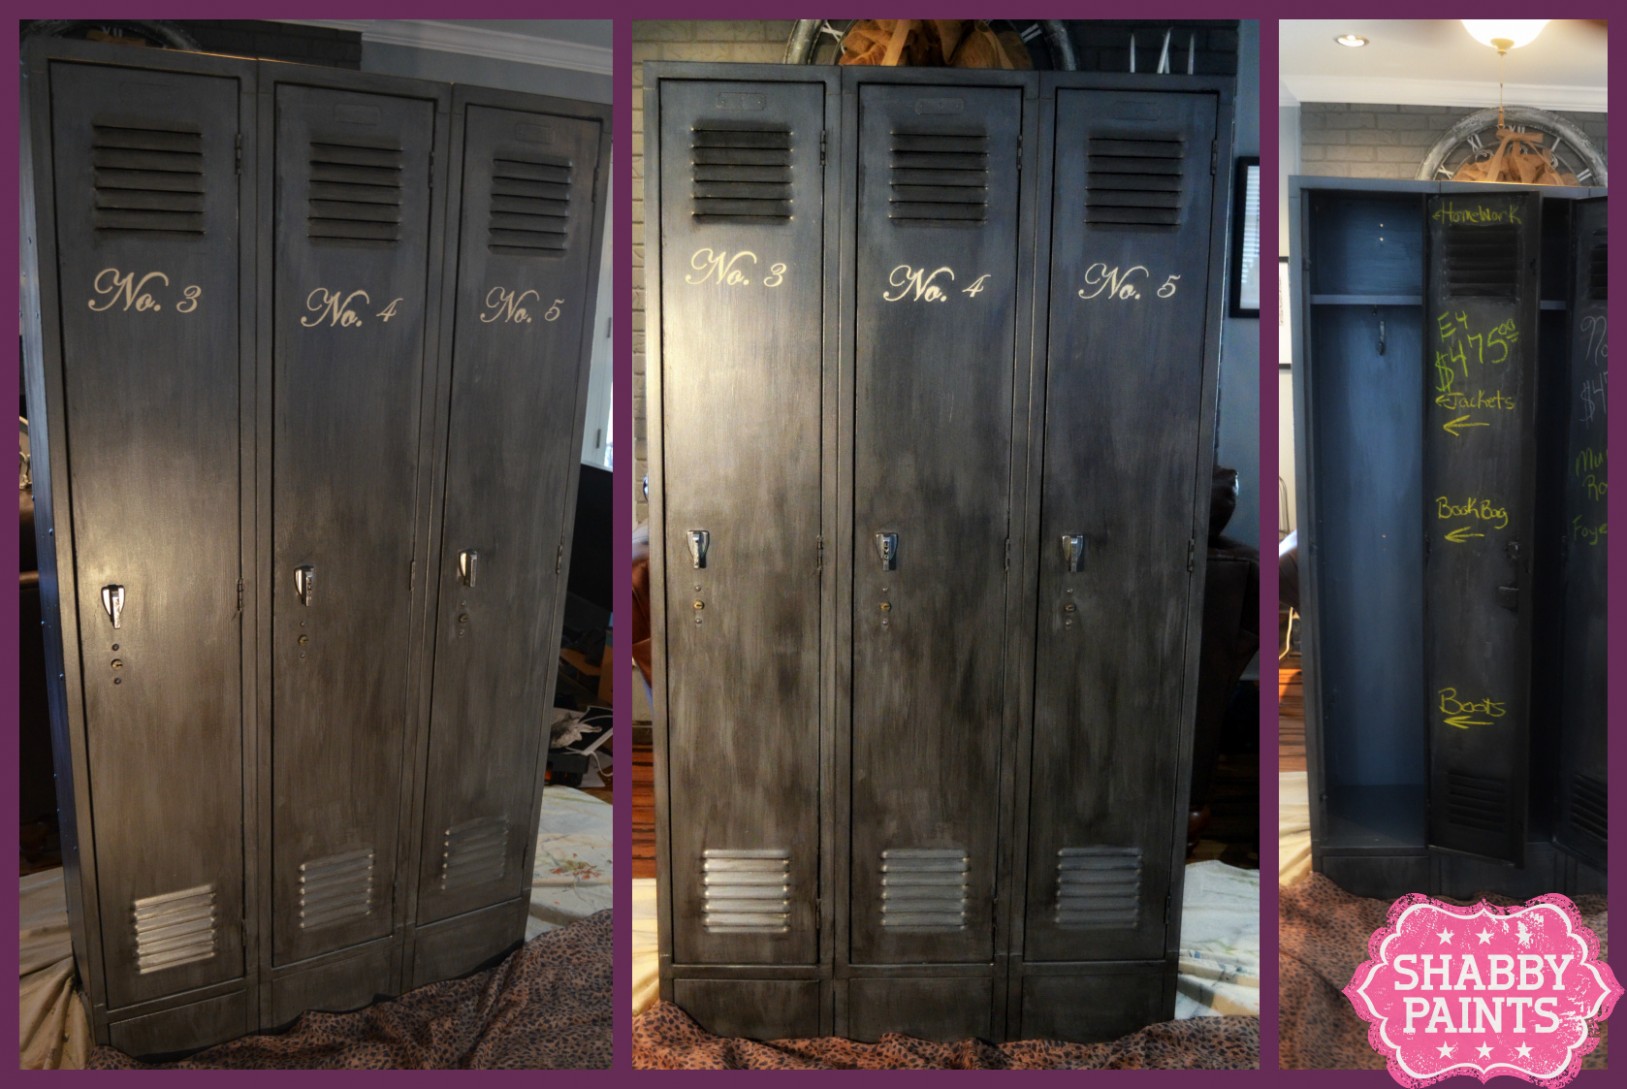 School Lockers Get New Love With Chalked Paint And Shimmer Finish ..